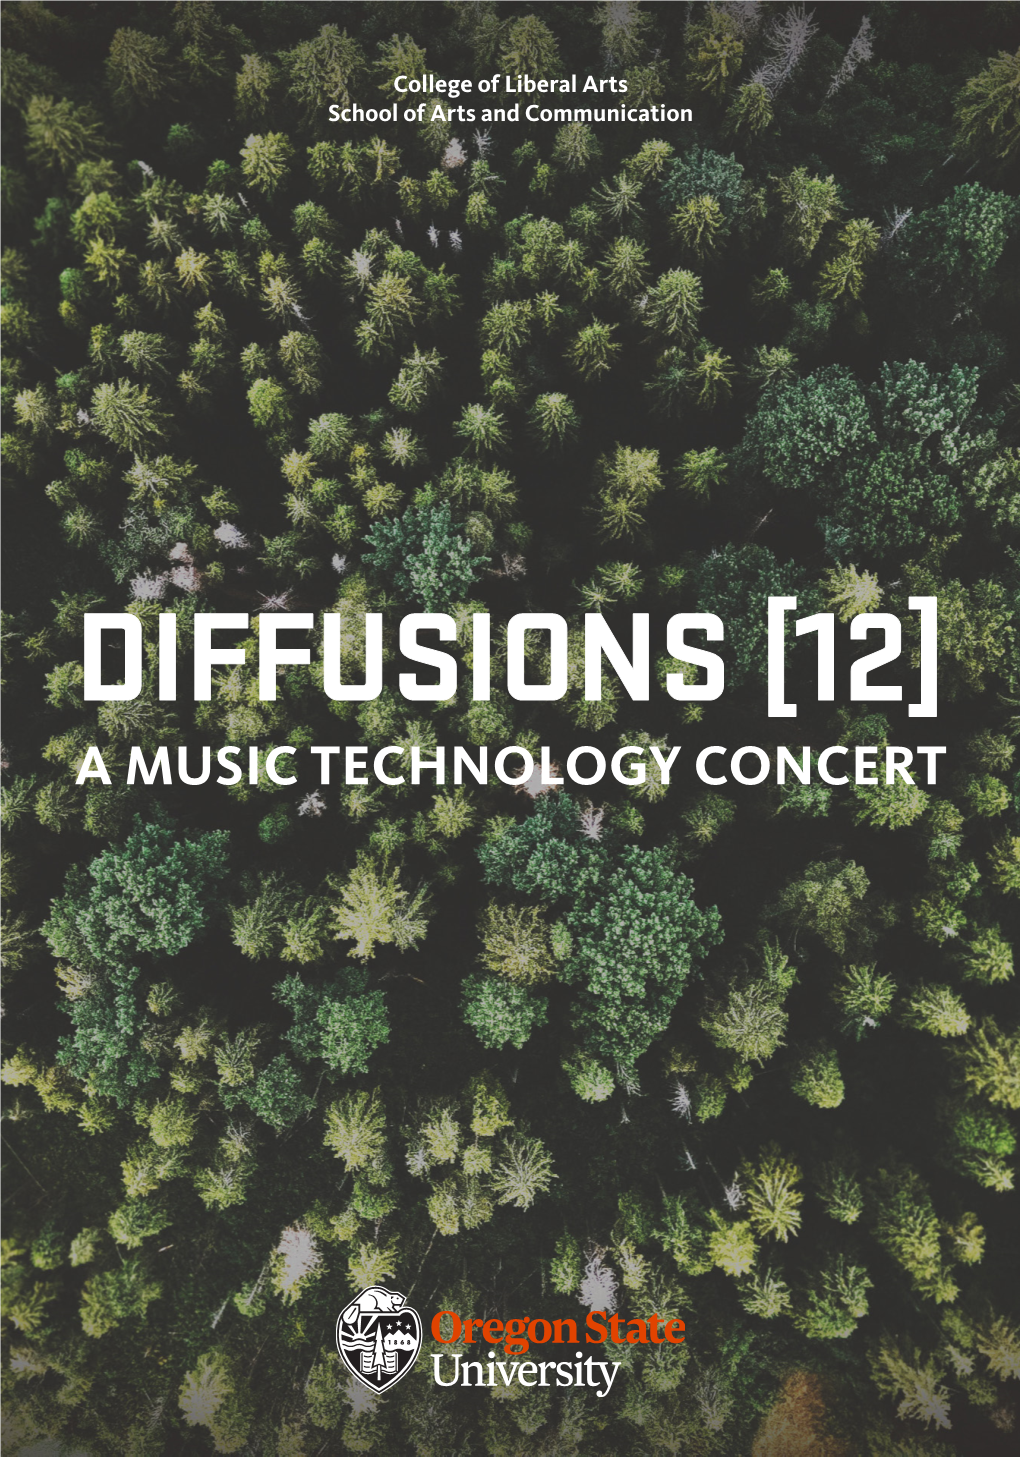 Diffusions [12] a Music Technology Concert About Diffusions